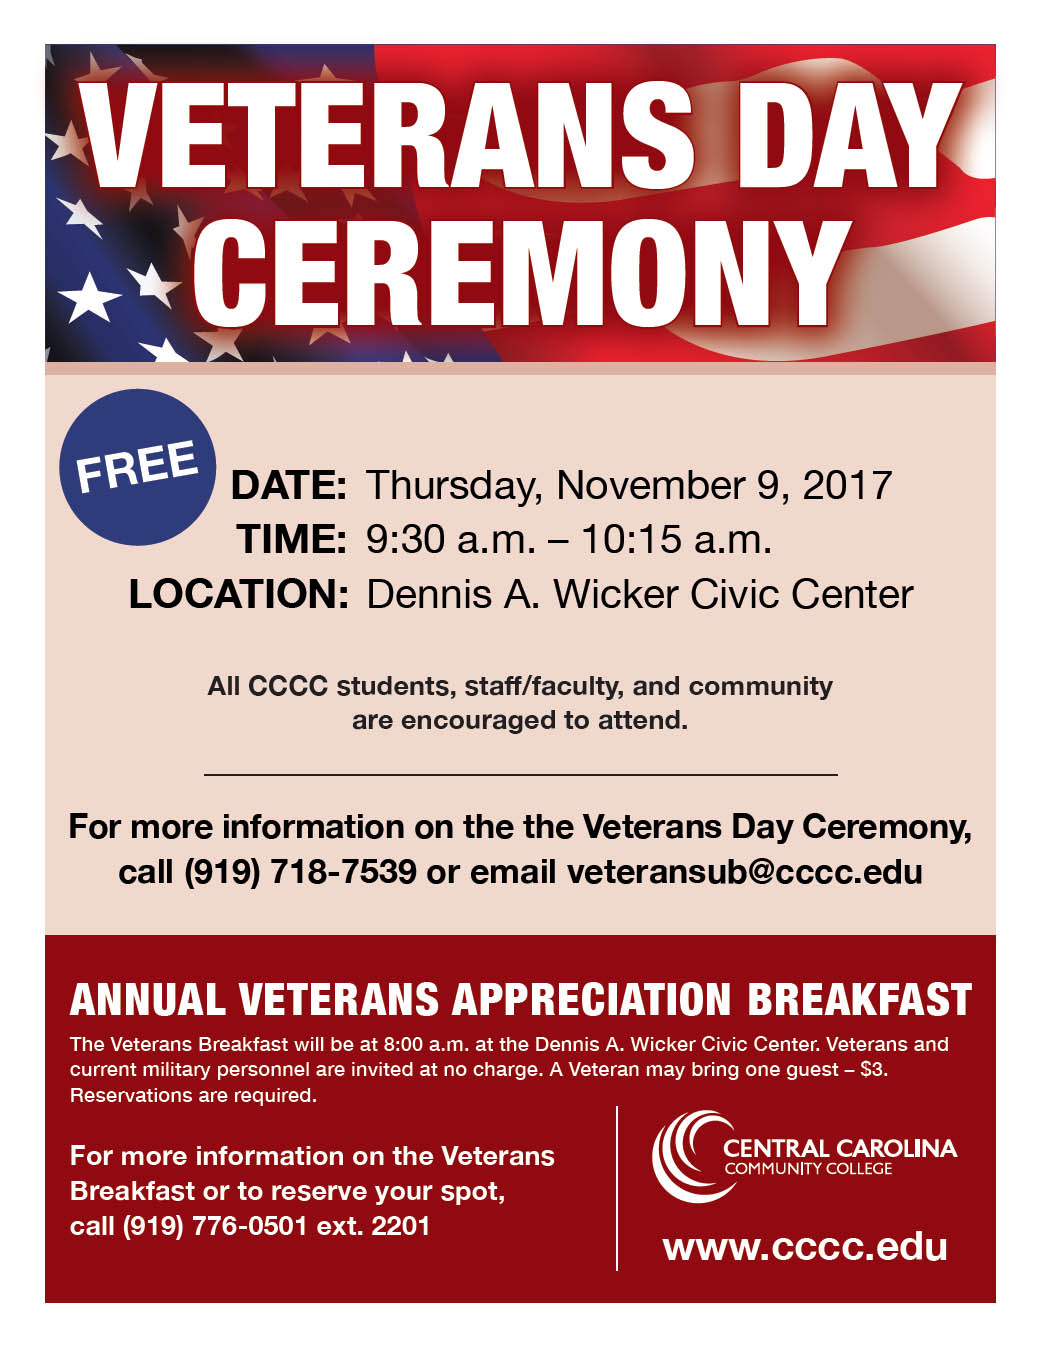 Veterans Day will be observed at CCCC in Sanford